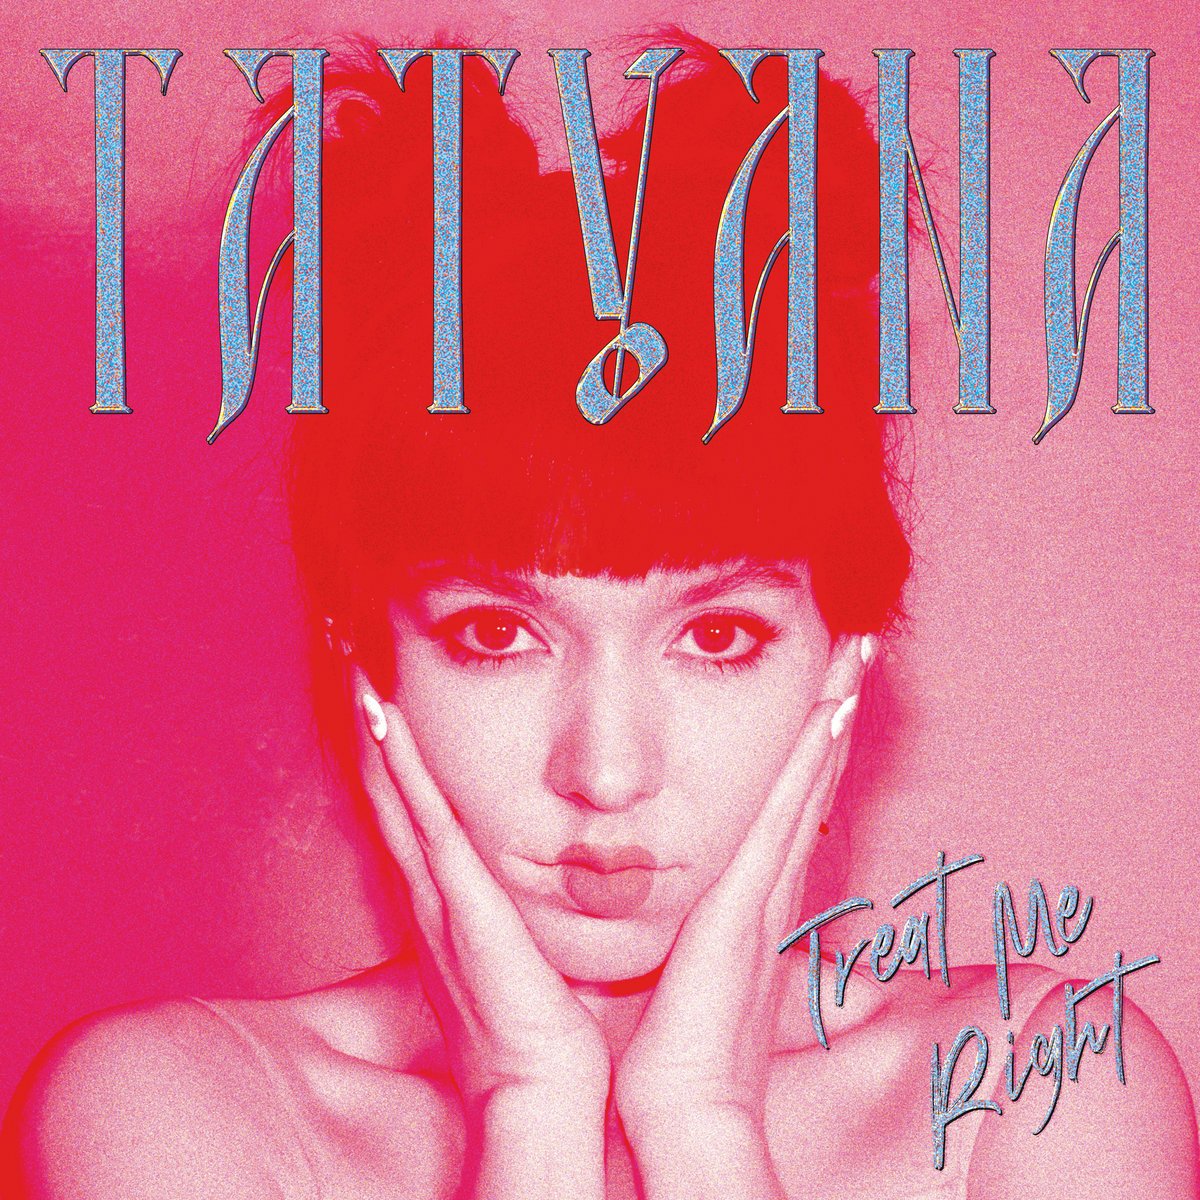 TATYANA's 'Treat Me Right' is out now on @sinderlyn 💘  Inspired by late-2000s indie pop and Swedish pop auteurs, TATYANA's (@blueharpgirl) debut album is a sparkling, catchy collection of ‘80s synths and futuristic auto-tuned vocals. Listen now ⤳ tatyana.ffm.to/treatmerightal…